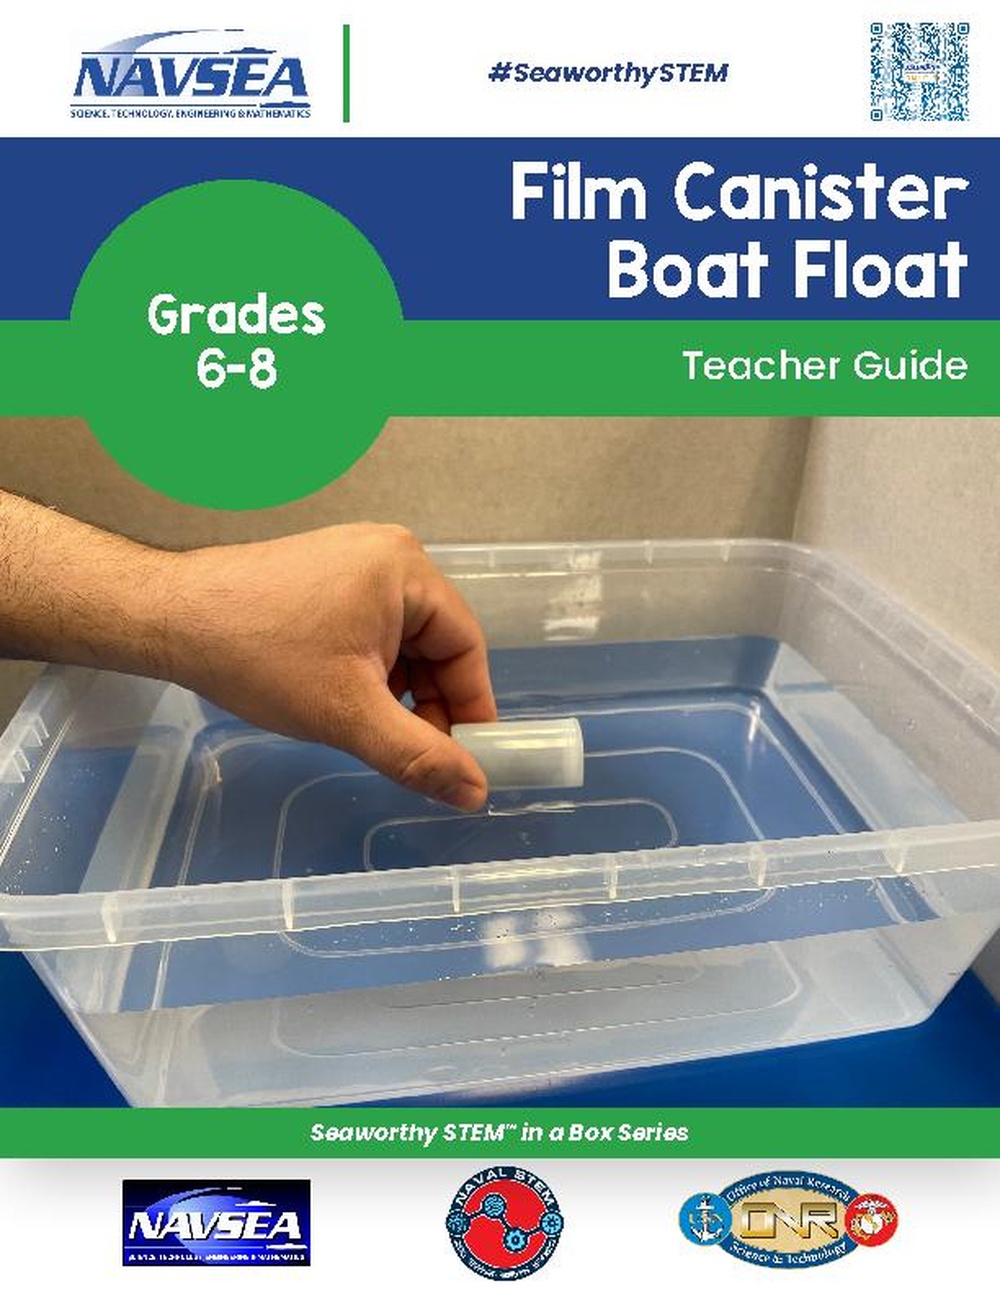 Film Canister Boat Float: A Seaworthy STEM™ in a Box 6-8 Lesson